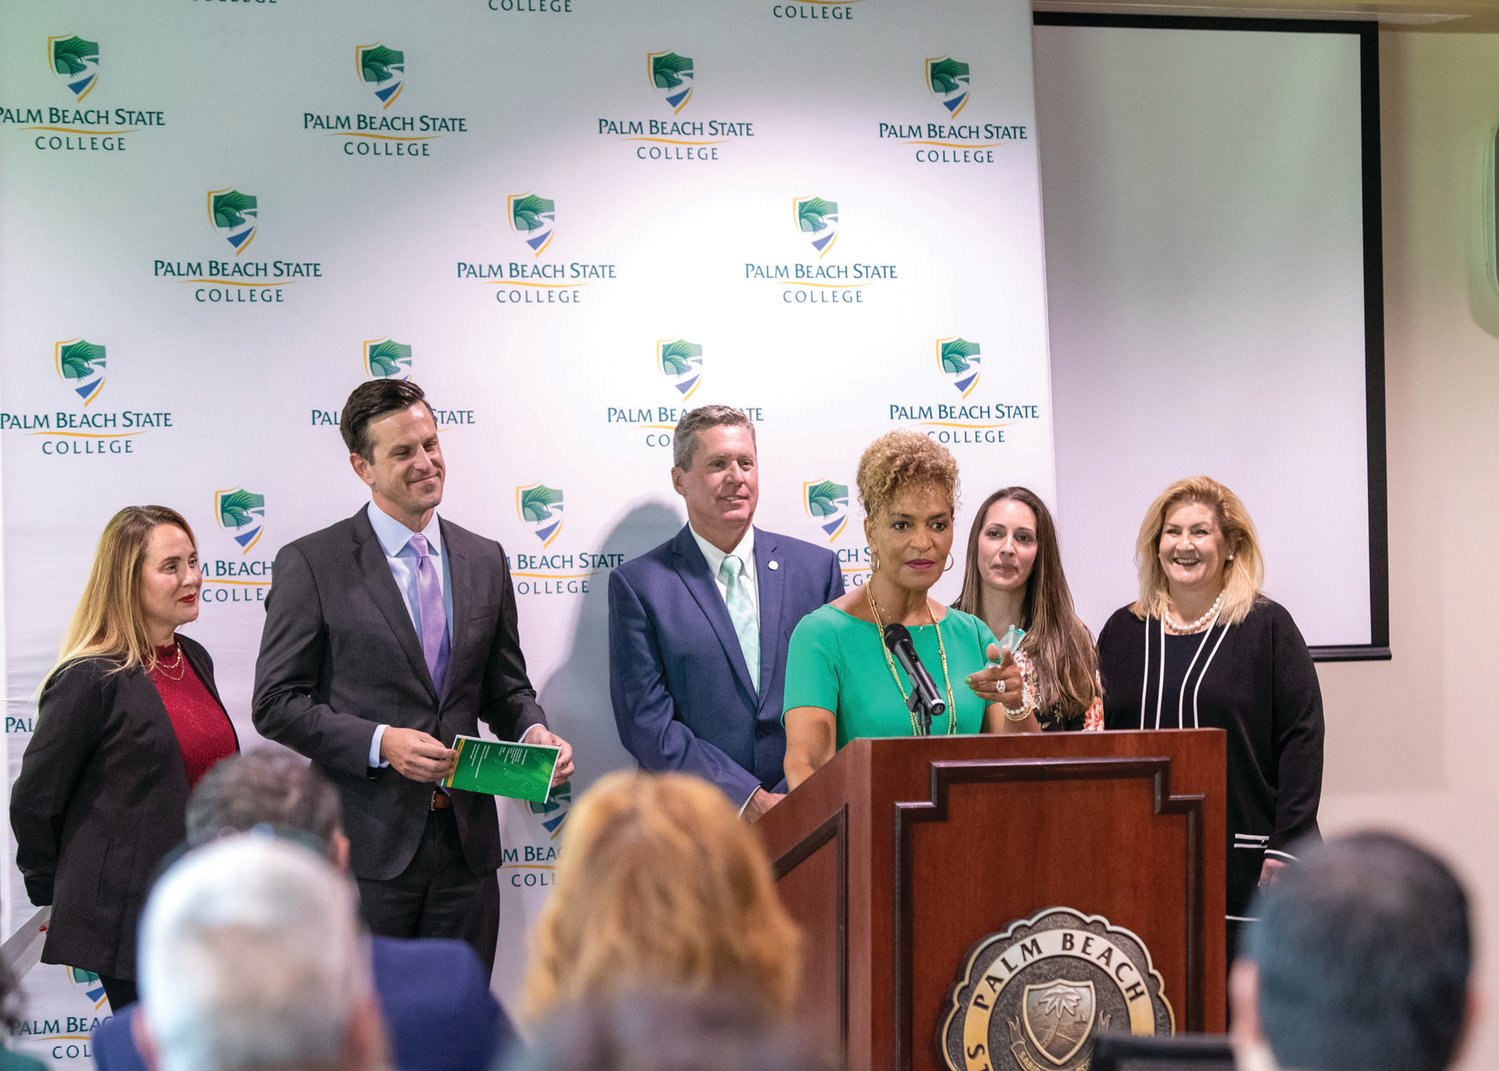 This photo is of Ava L. Parker, J.D., PBSC president is joined by Deana Pizzo, CEO, I.T. Solutions of South Florida, Henry Mack, Ed.D., senior chancellor at the Florida Department of Education, Mike Burke, superintendent of Palm Beach County Schools, Nikki Cabus, CEO, South Florida Tech Hub and Julia Dattolo, president/CEO, CareerSource Palm Beach County.